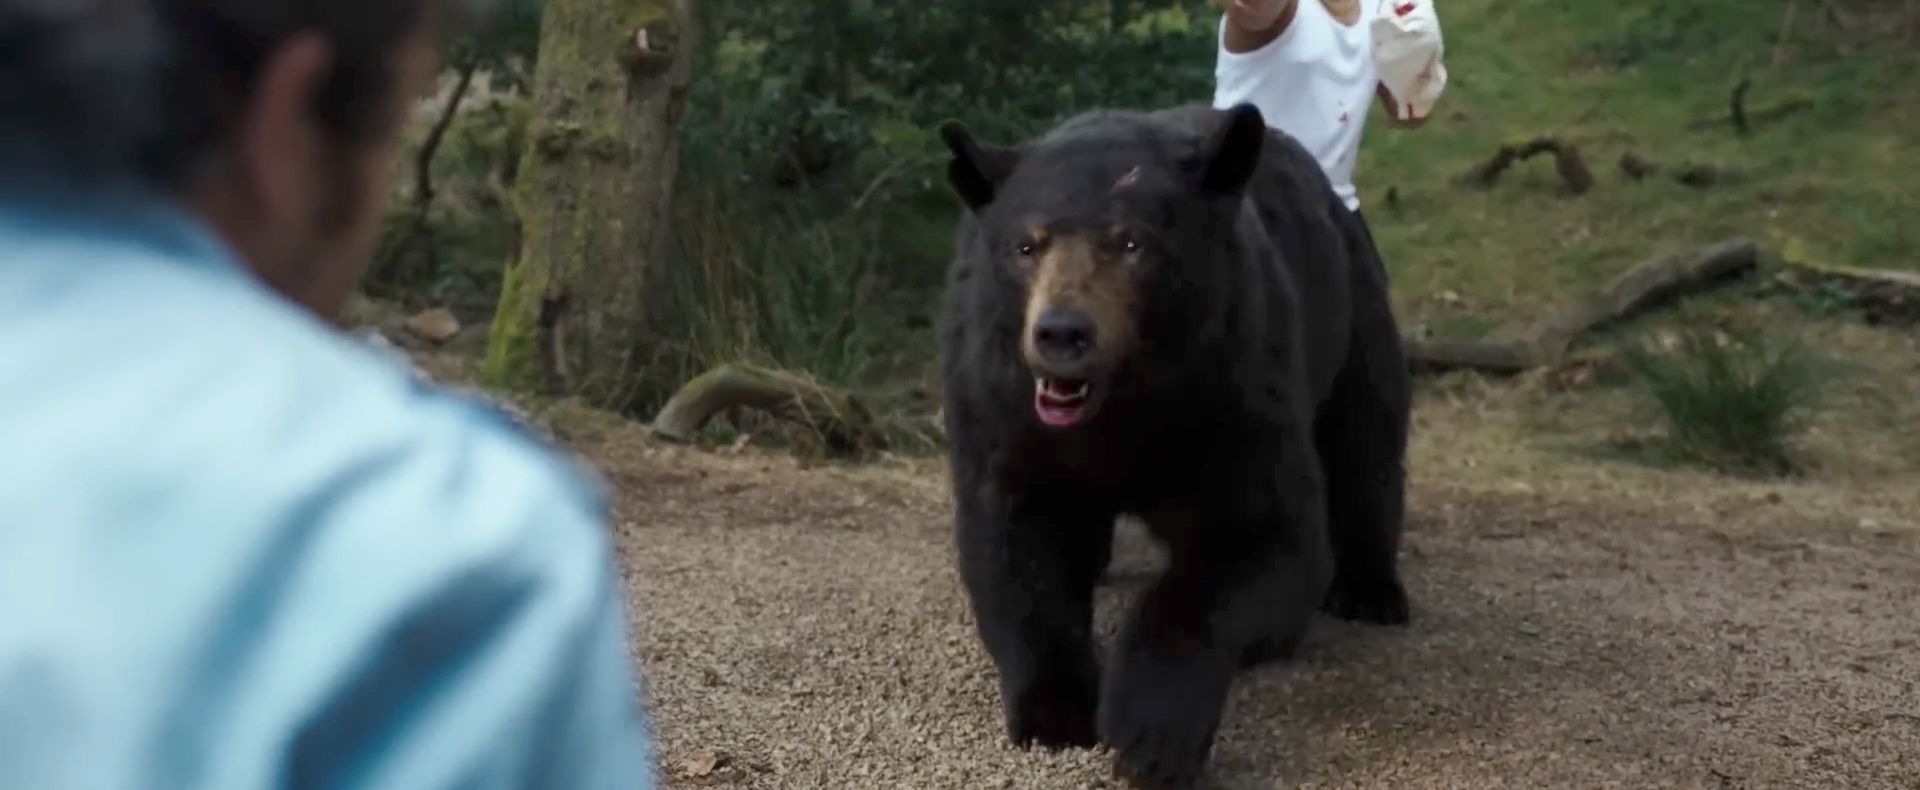 First trailer for Cocaine Bear arrives online